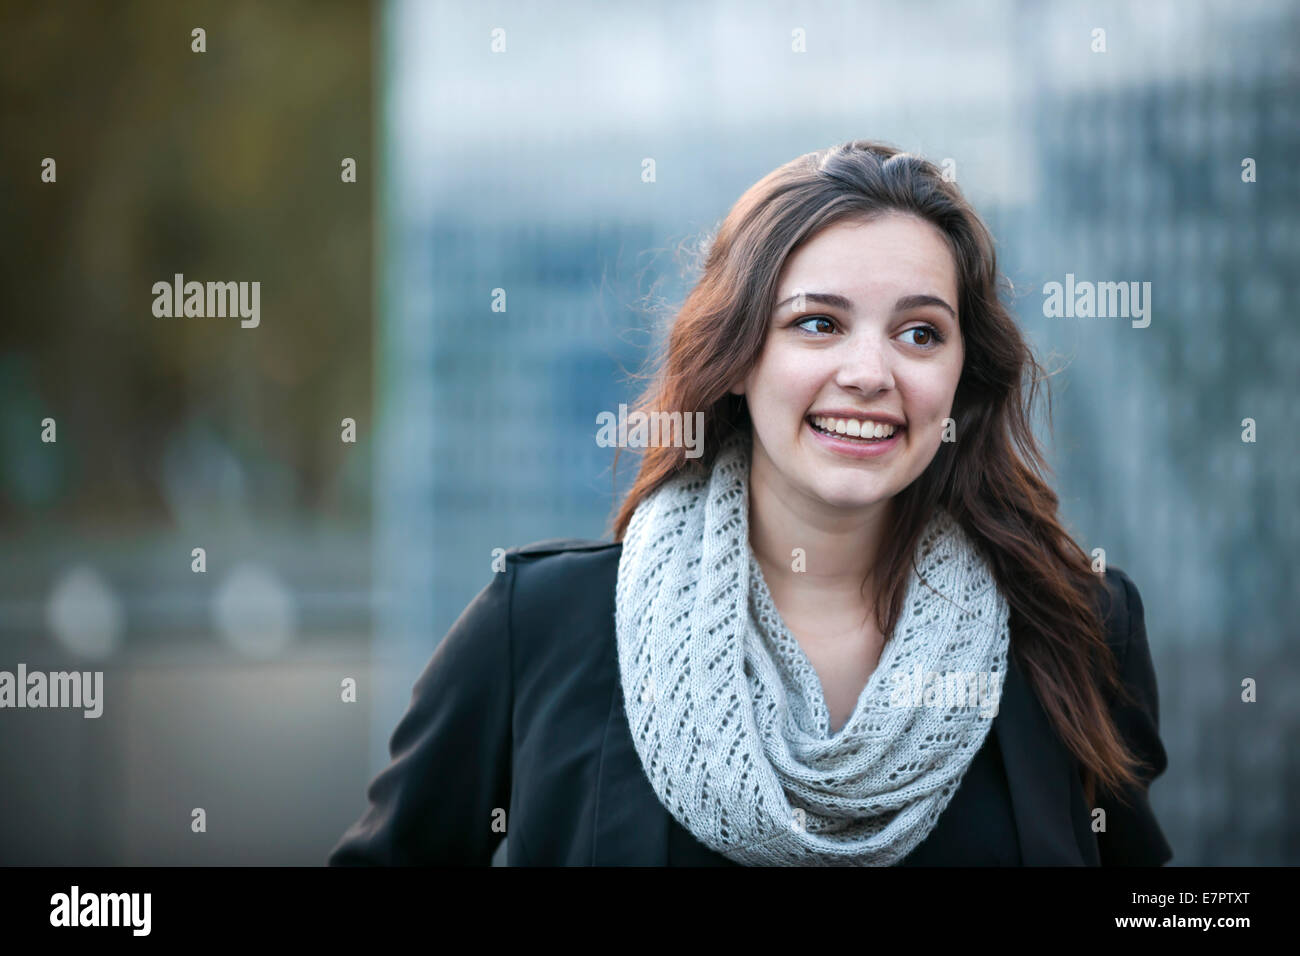 Candid portrait of happy young woman smiling with copy space in urban setting Banque D'Images